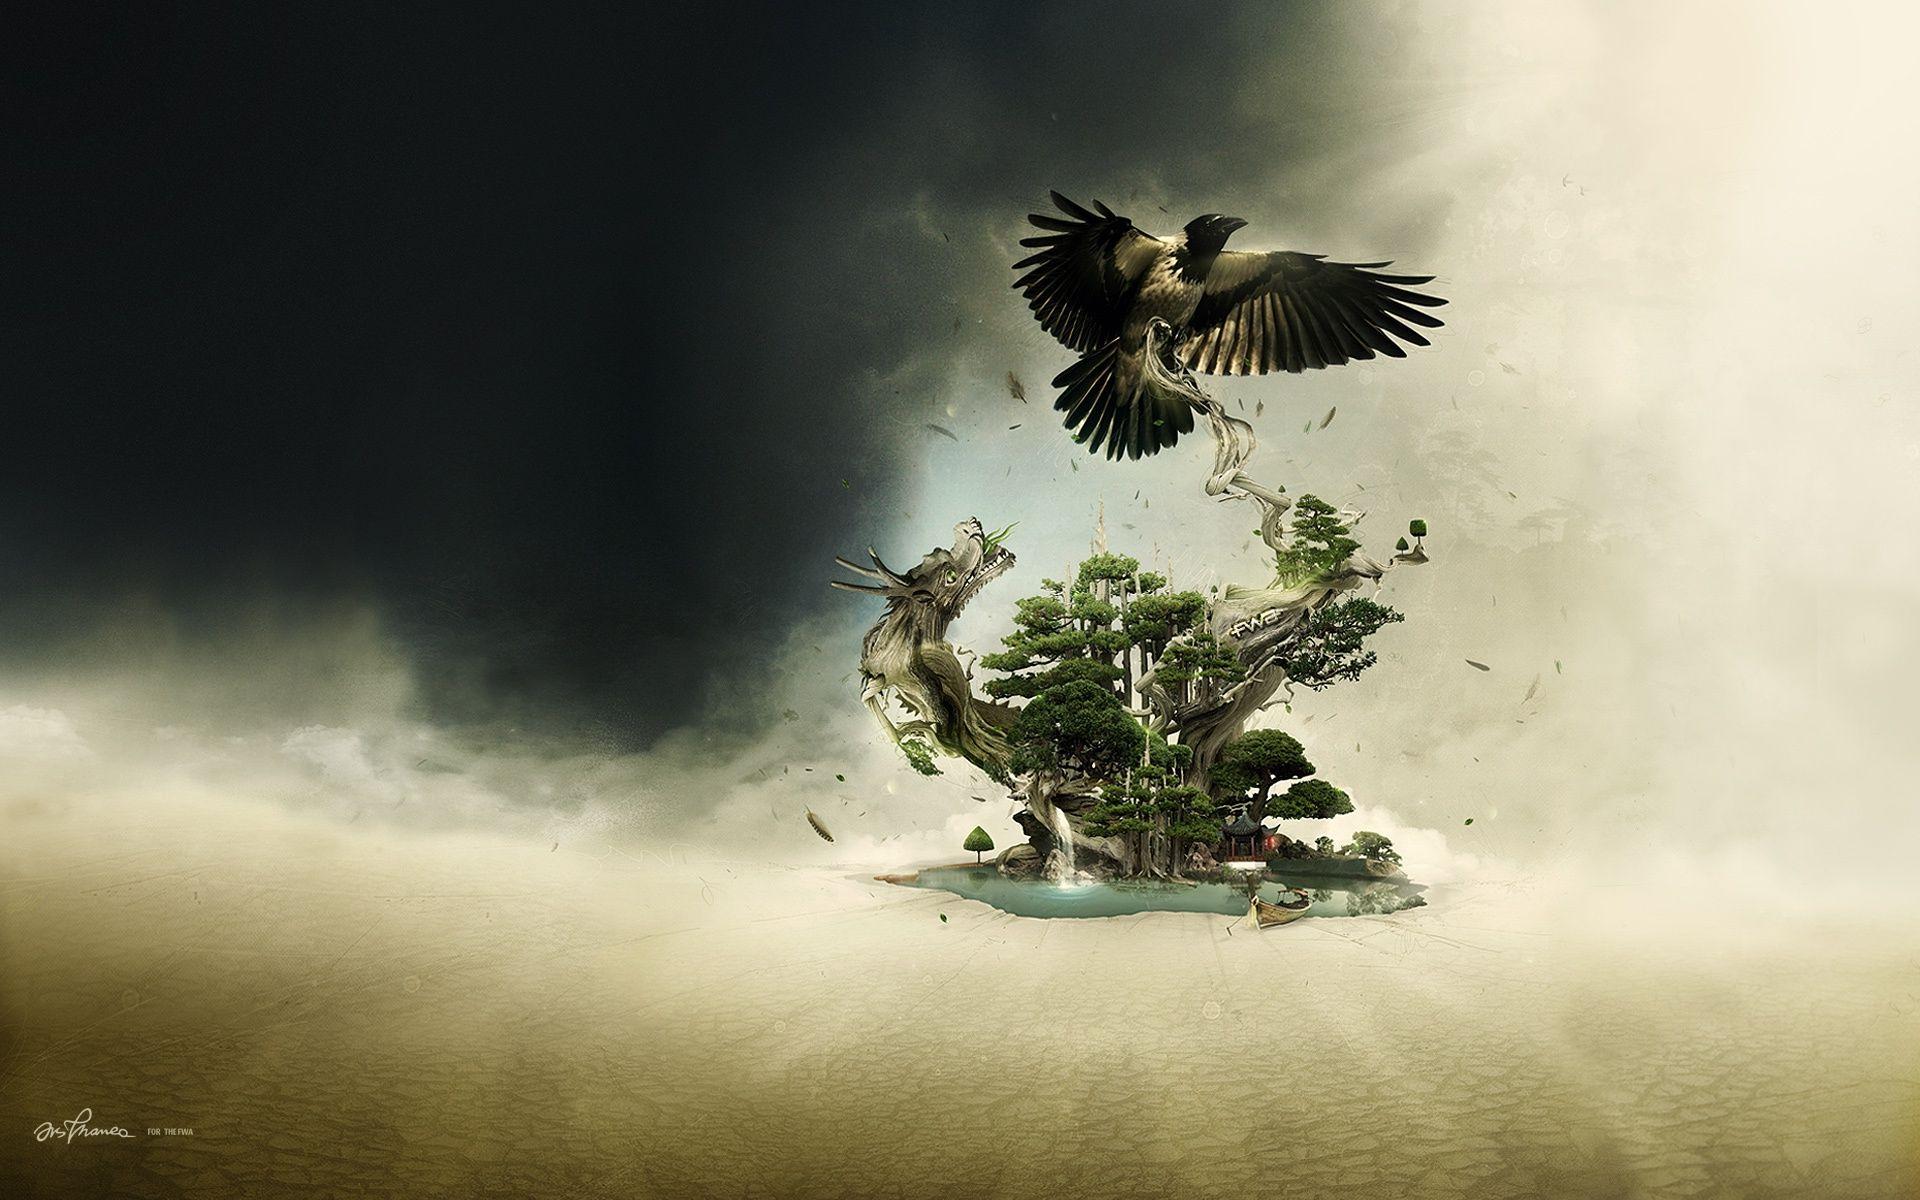 Desert Tree and the Raven Wallpaper and Photo High Resolution